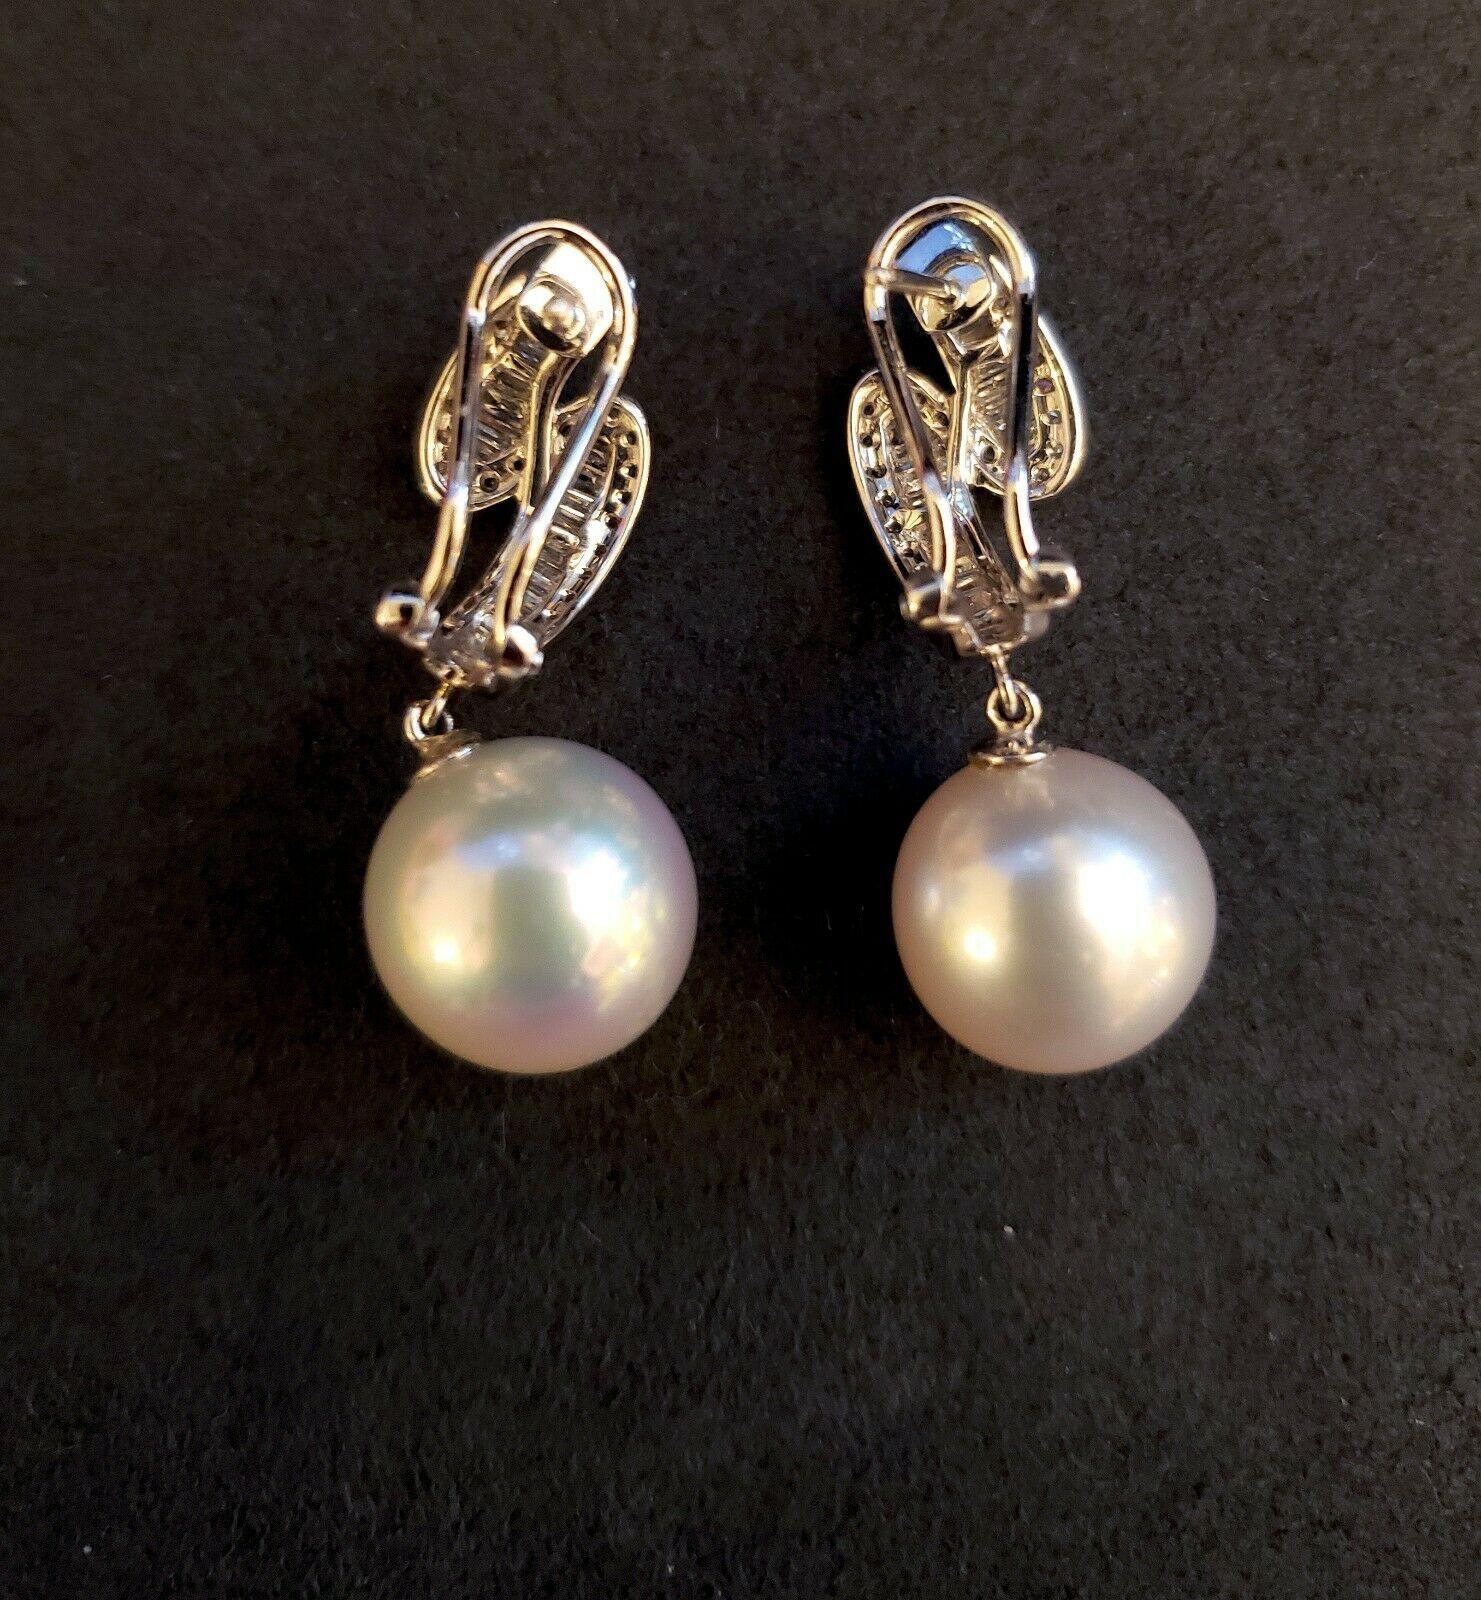 Contemporary 14 Karat White Gold, Round South Sea Pearl and Diamond Earrings